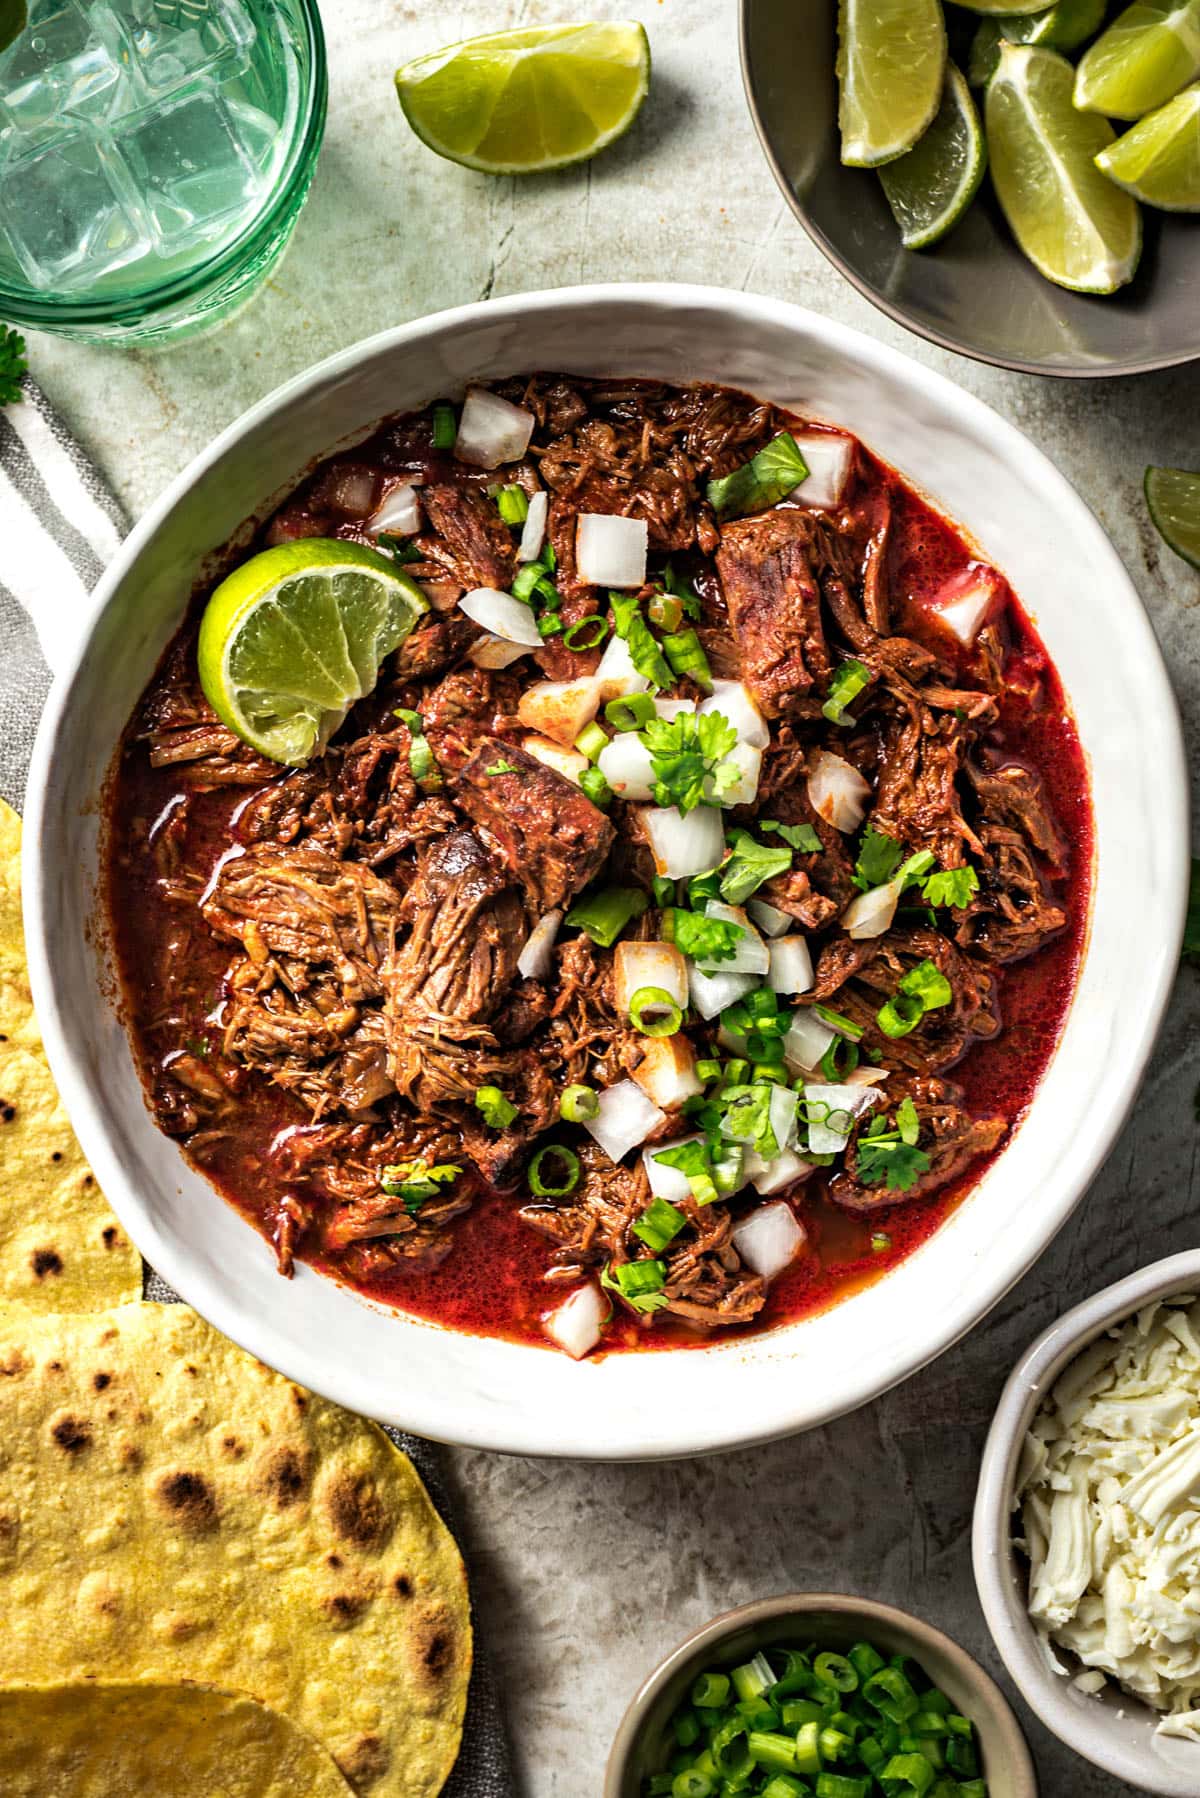 Birria de res served in a bowl with all of the fixings